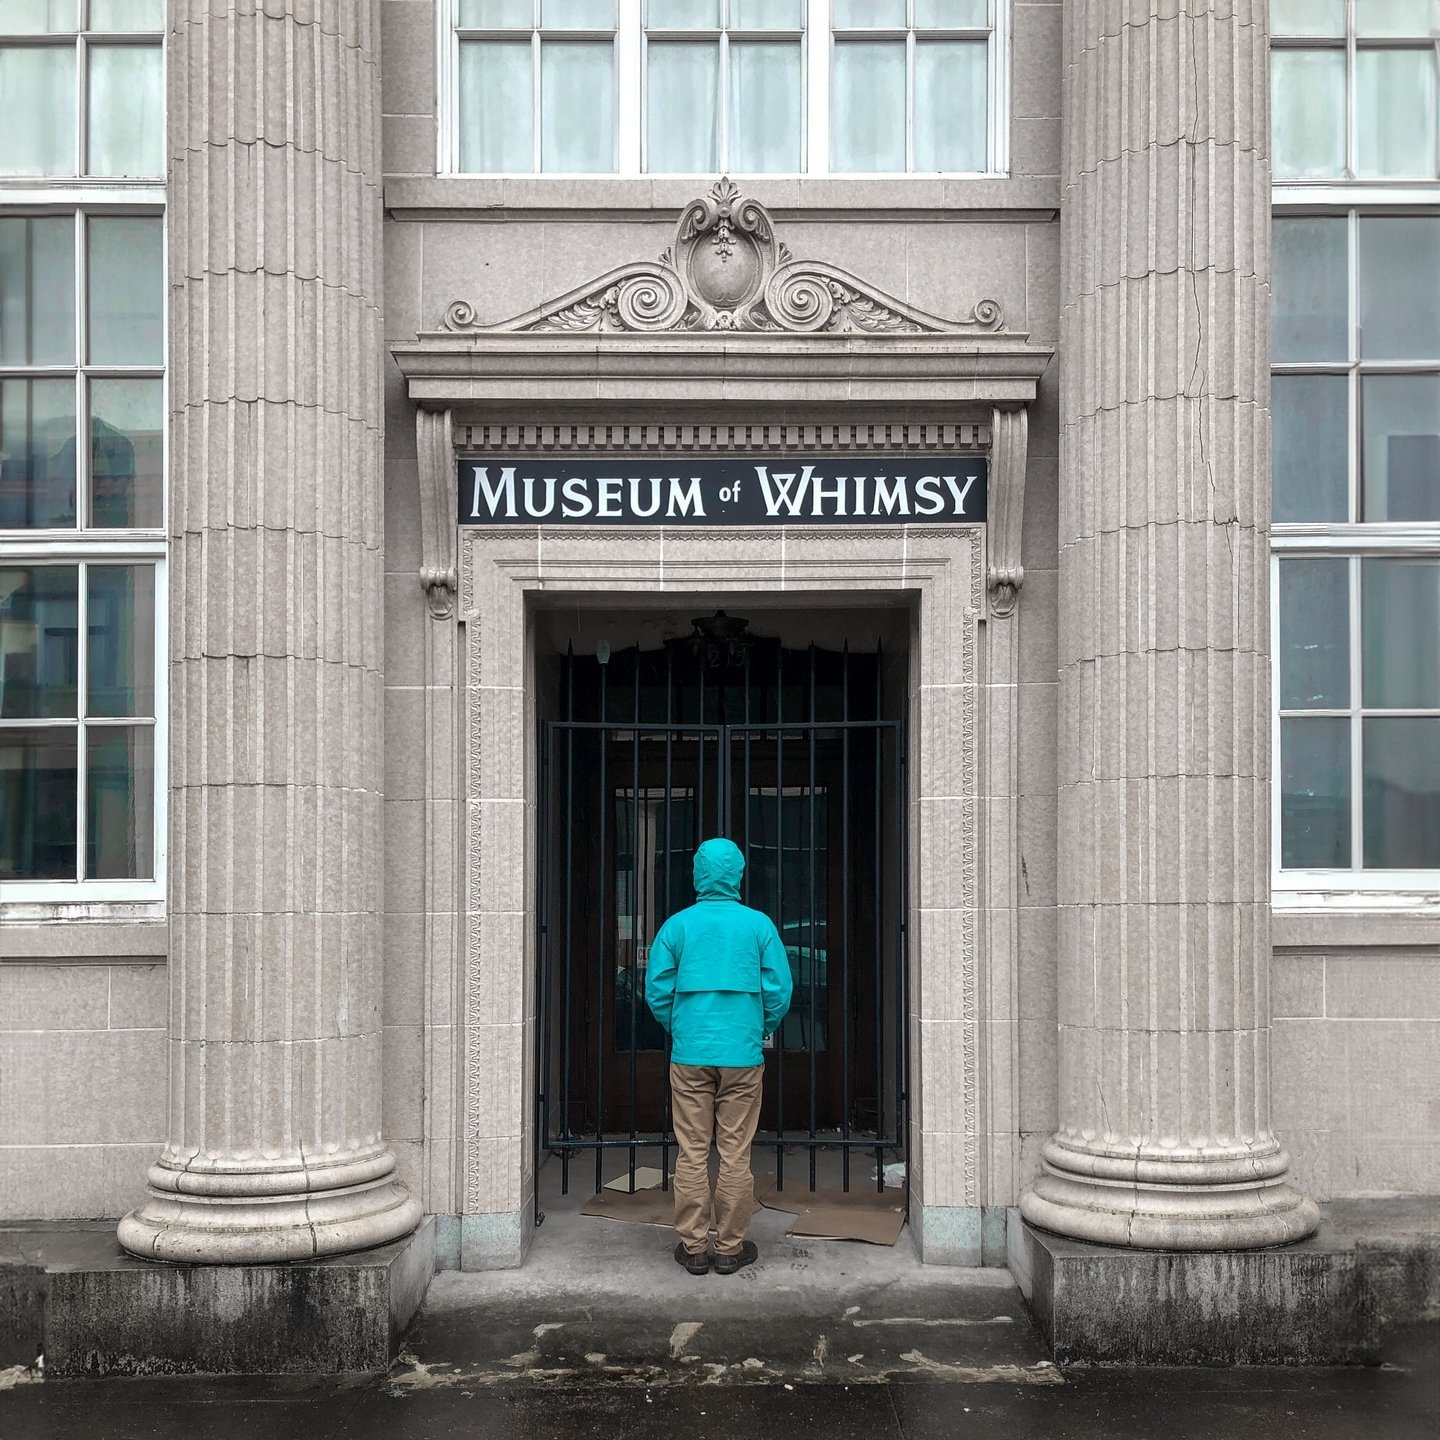 My kind of Museum! (actually, I love most museums - bonus points if the are weirdly niche)